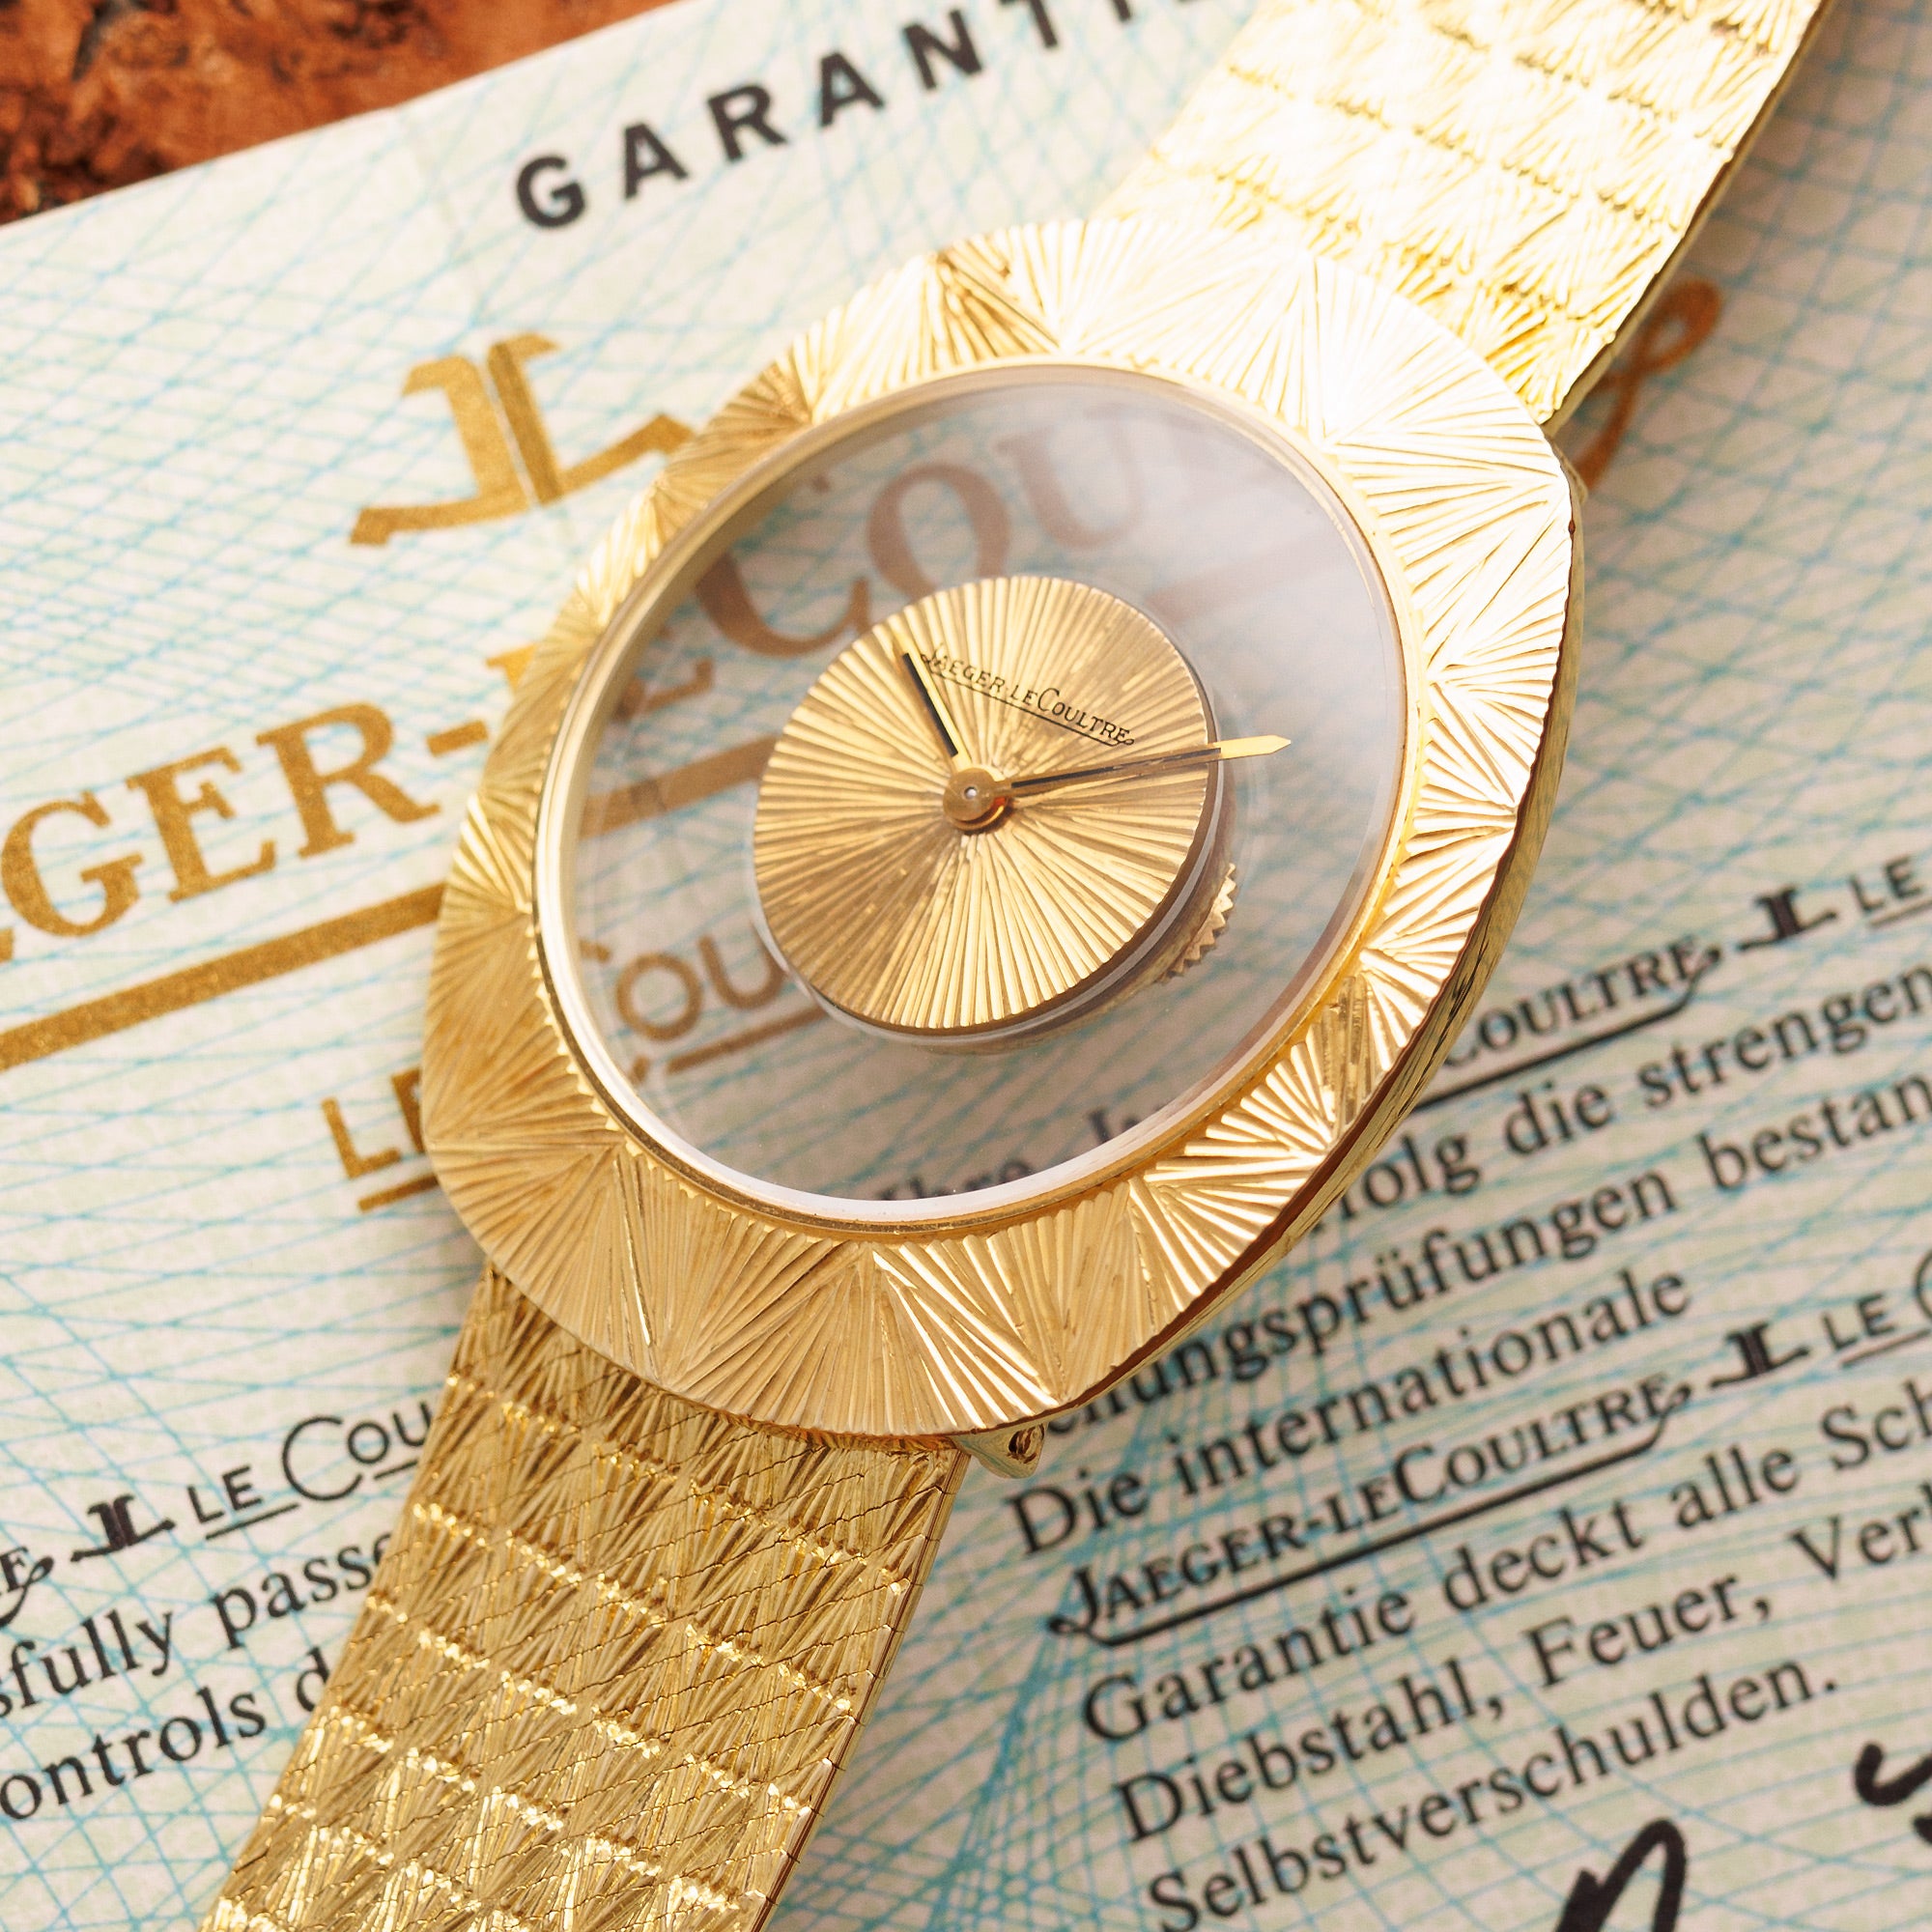 Jaeger LeCoultre - Jaeger Lecoultre Yellow Gold Mystery Watch Ref. 17006 - The Keystone Watches